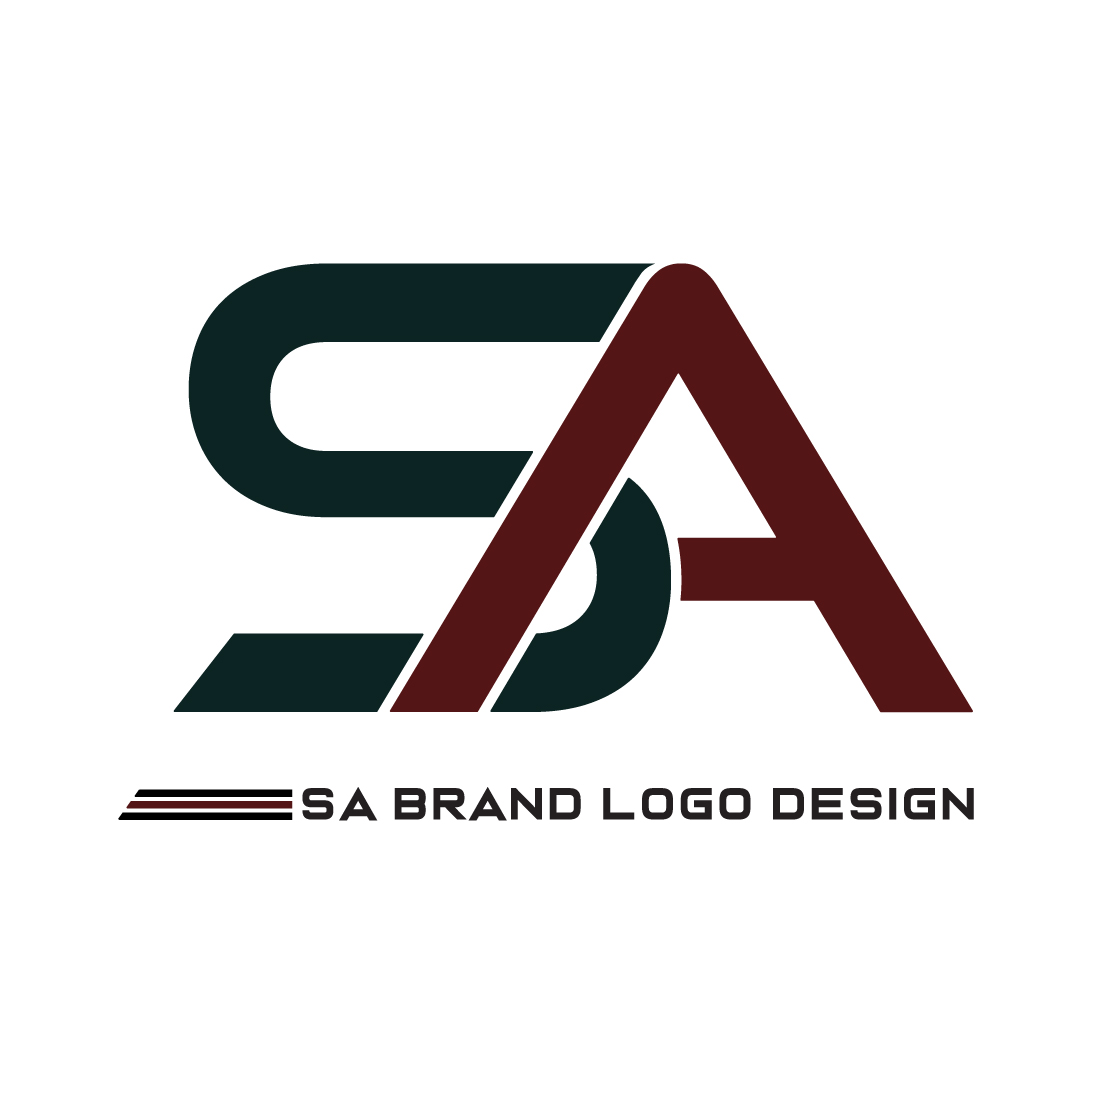 Initials SA letters logo design vector images SA logo design template icon AS logo monogram best company identity preview image.